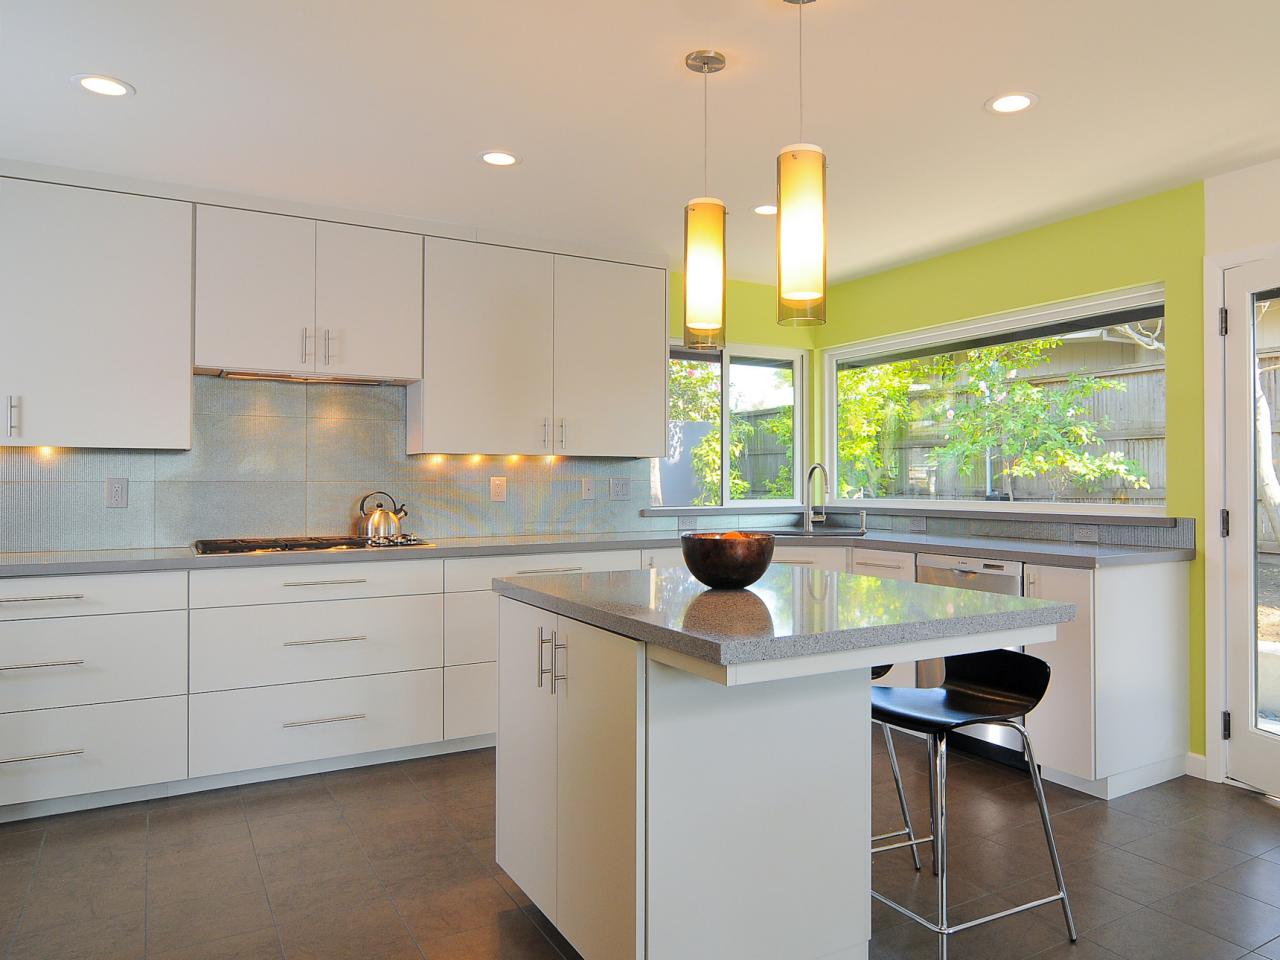 Modern Kitchen Cabinets Pictures, Options, Tips & Ideas   HGTV